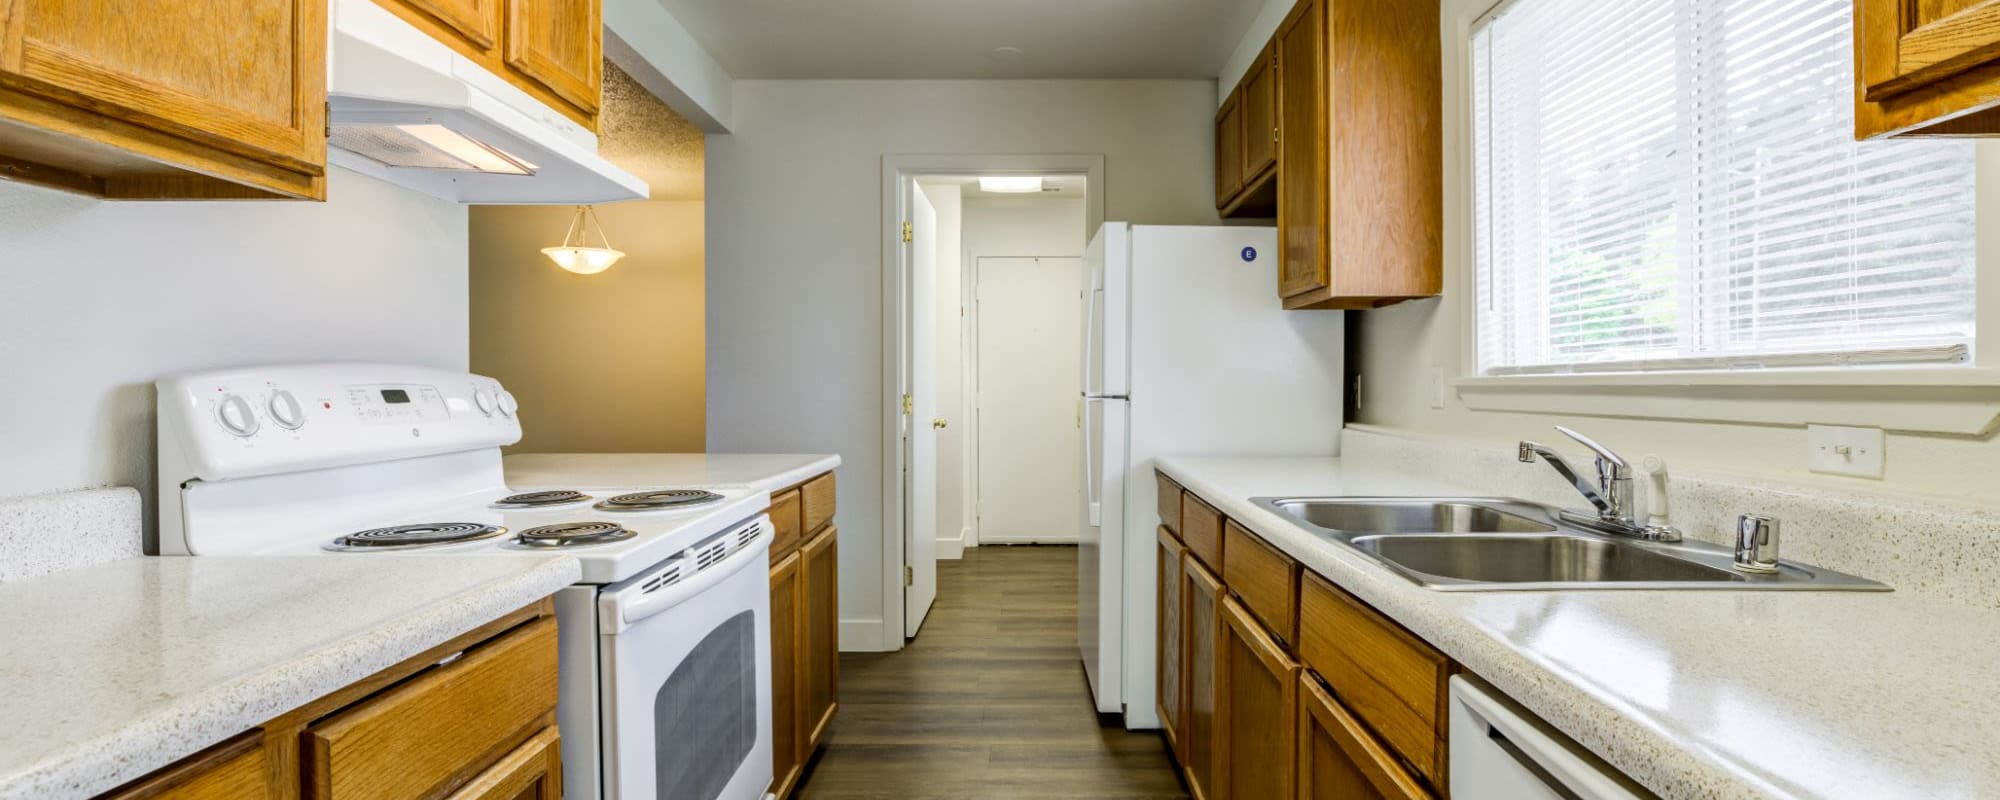 Gally kitchen with ample storage at Madigan in Joint Base Lewis McChord, Washington